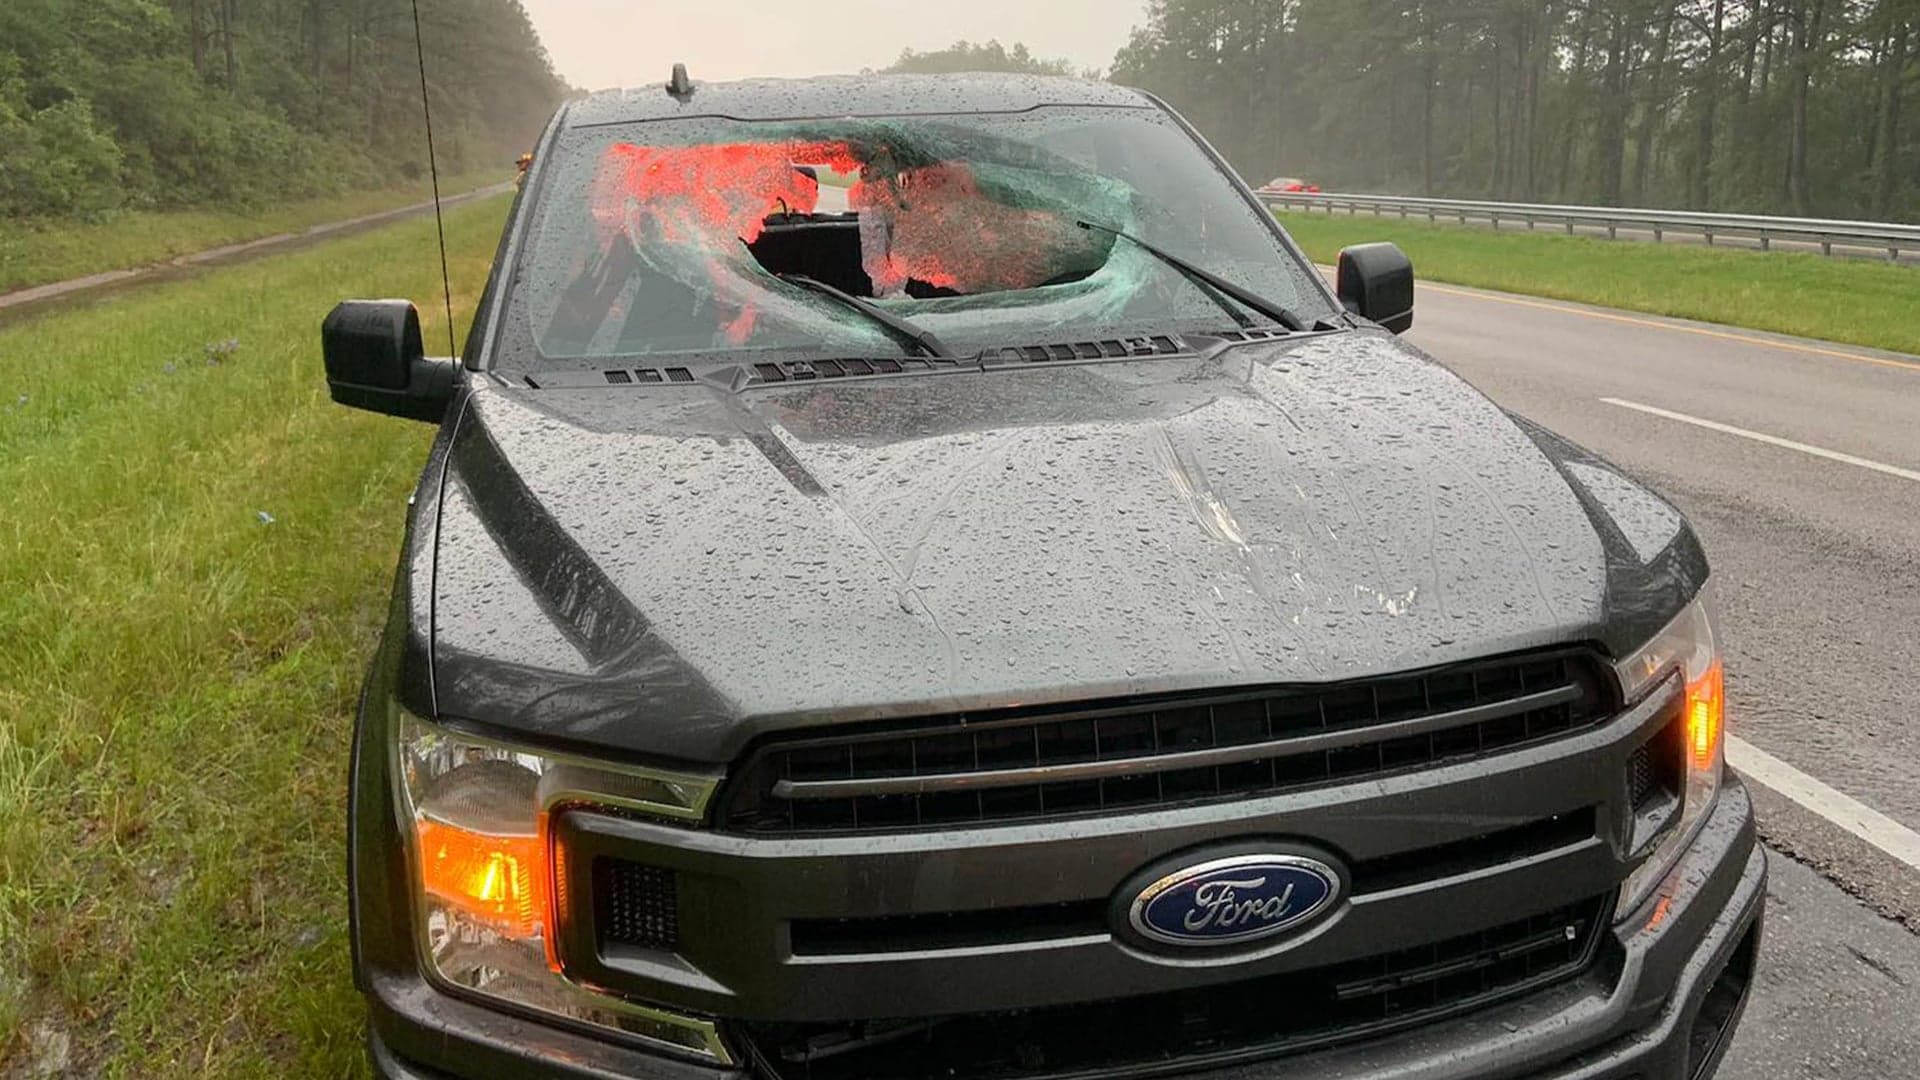 Lightning Strikes Highway, Sends Chunk of Road Through Ford F-150’s Windshield